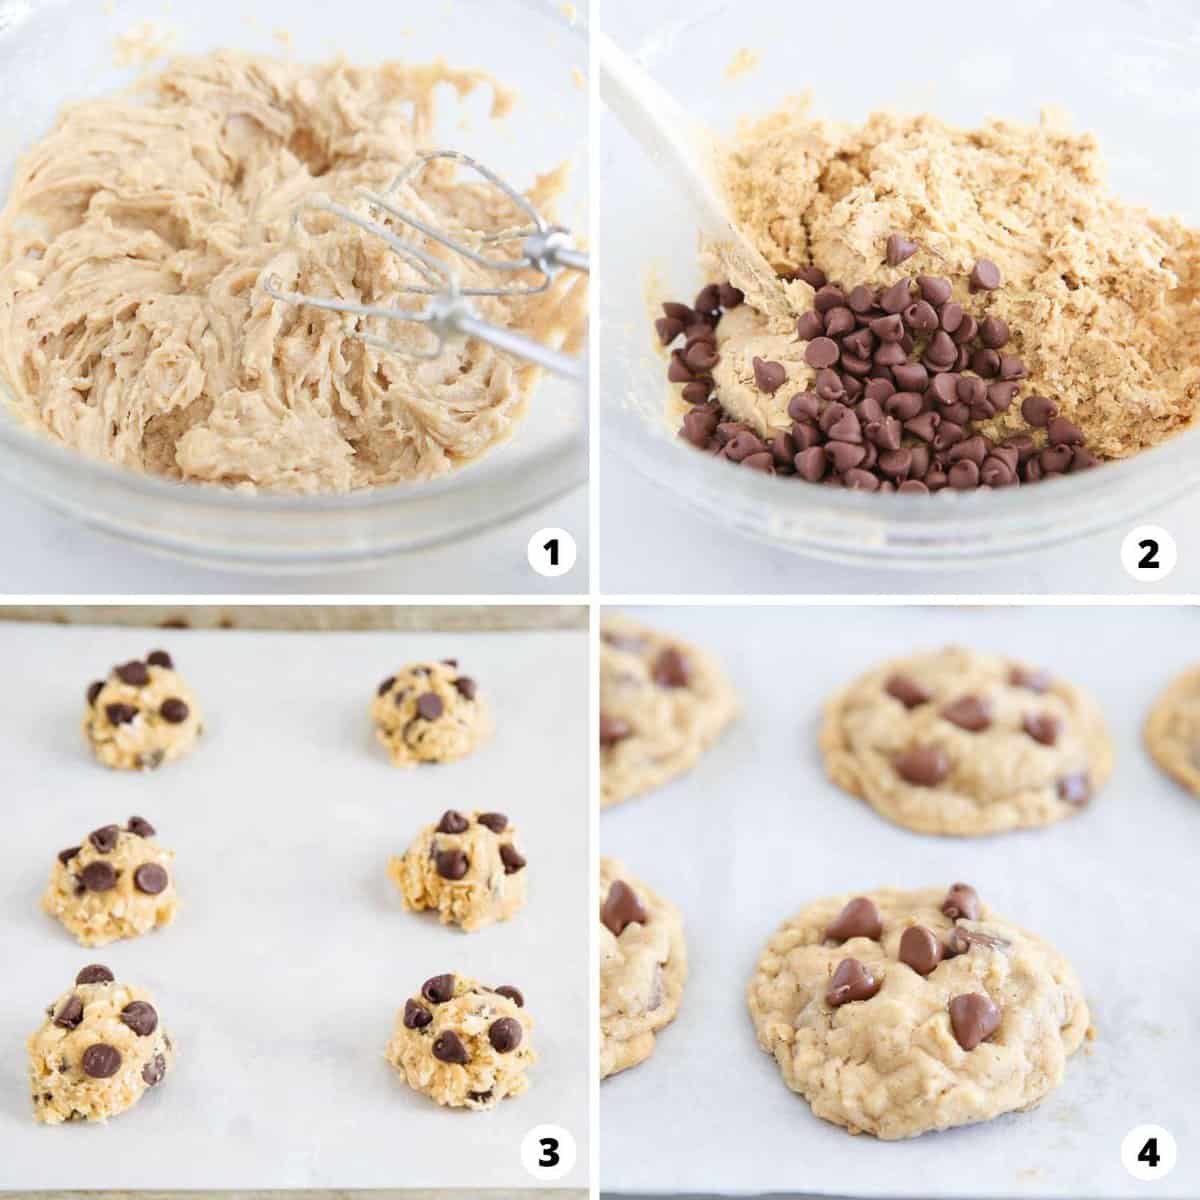 Showing how to make oatmeal chocolate chip cookies in a 4 step collage.